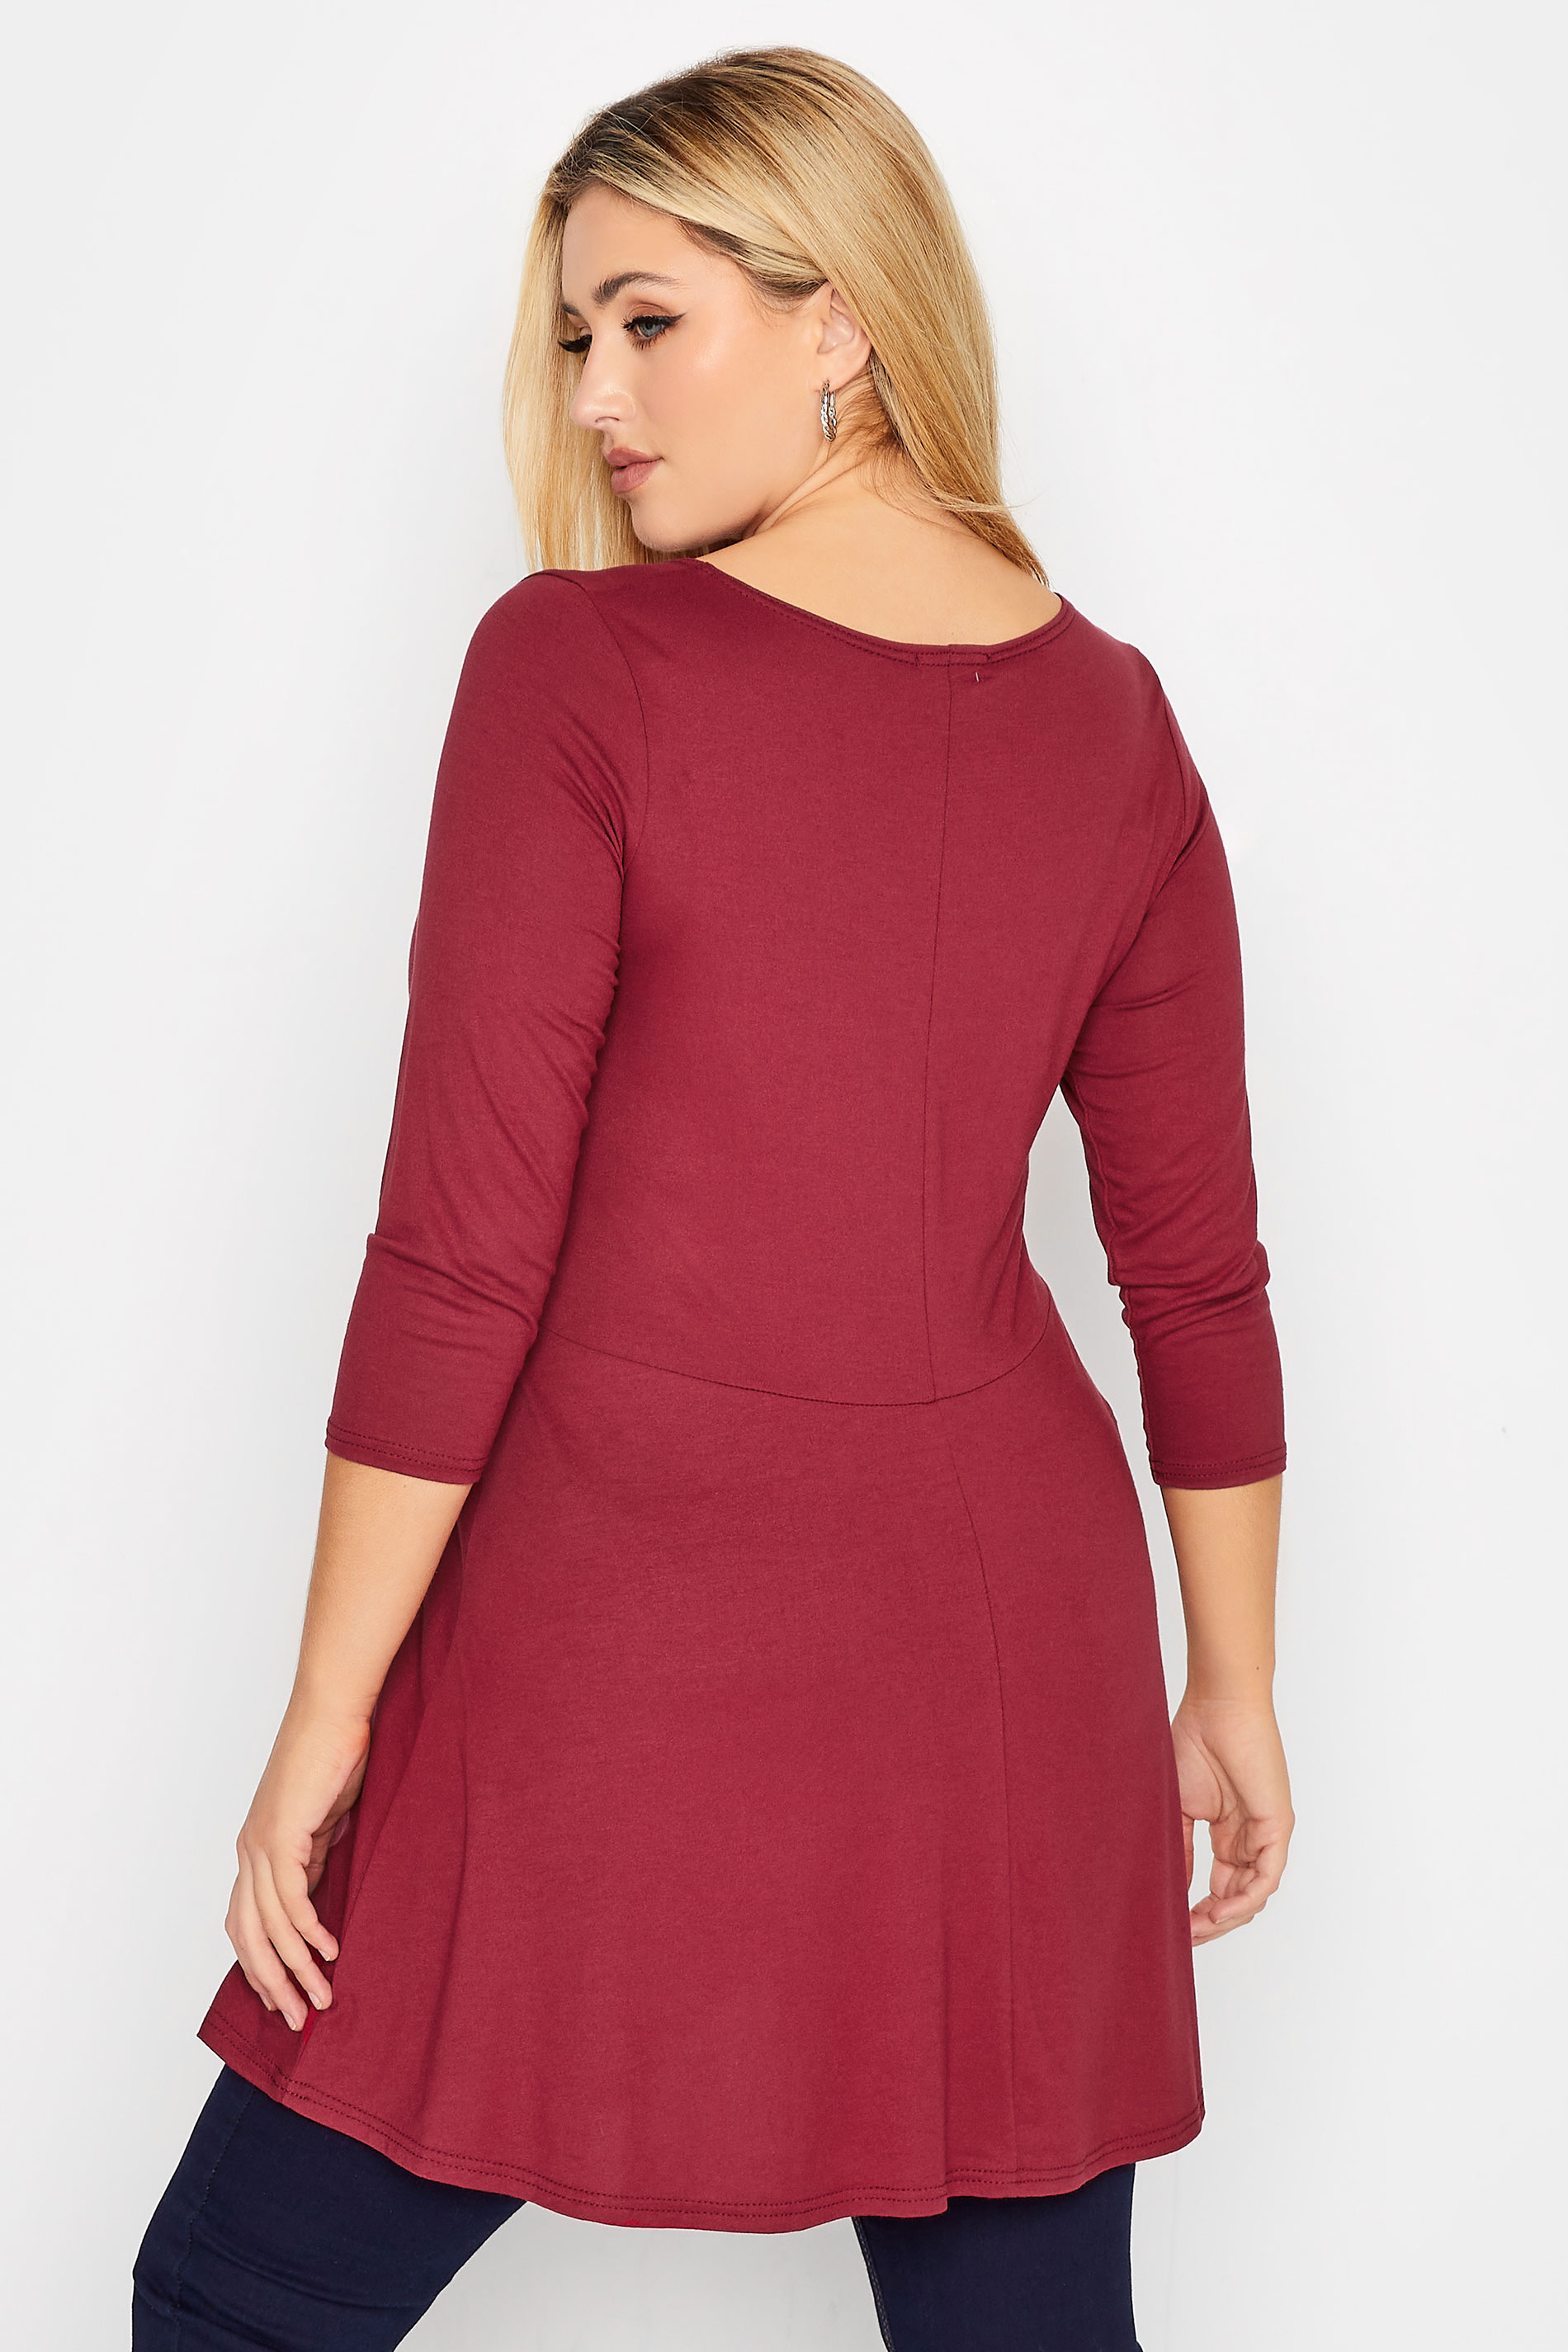 BUMP IT UP MATERNITY Plus Size Red Knot Top | Yours Clothing 3